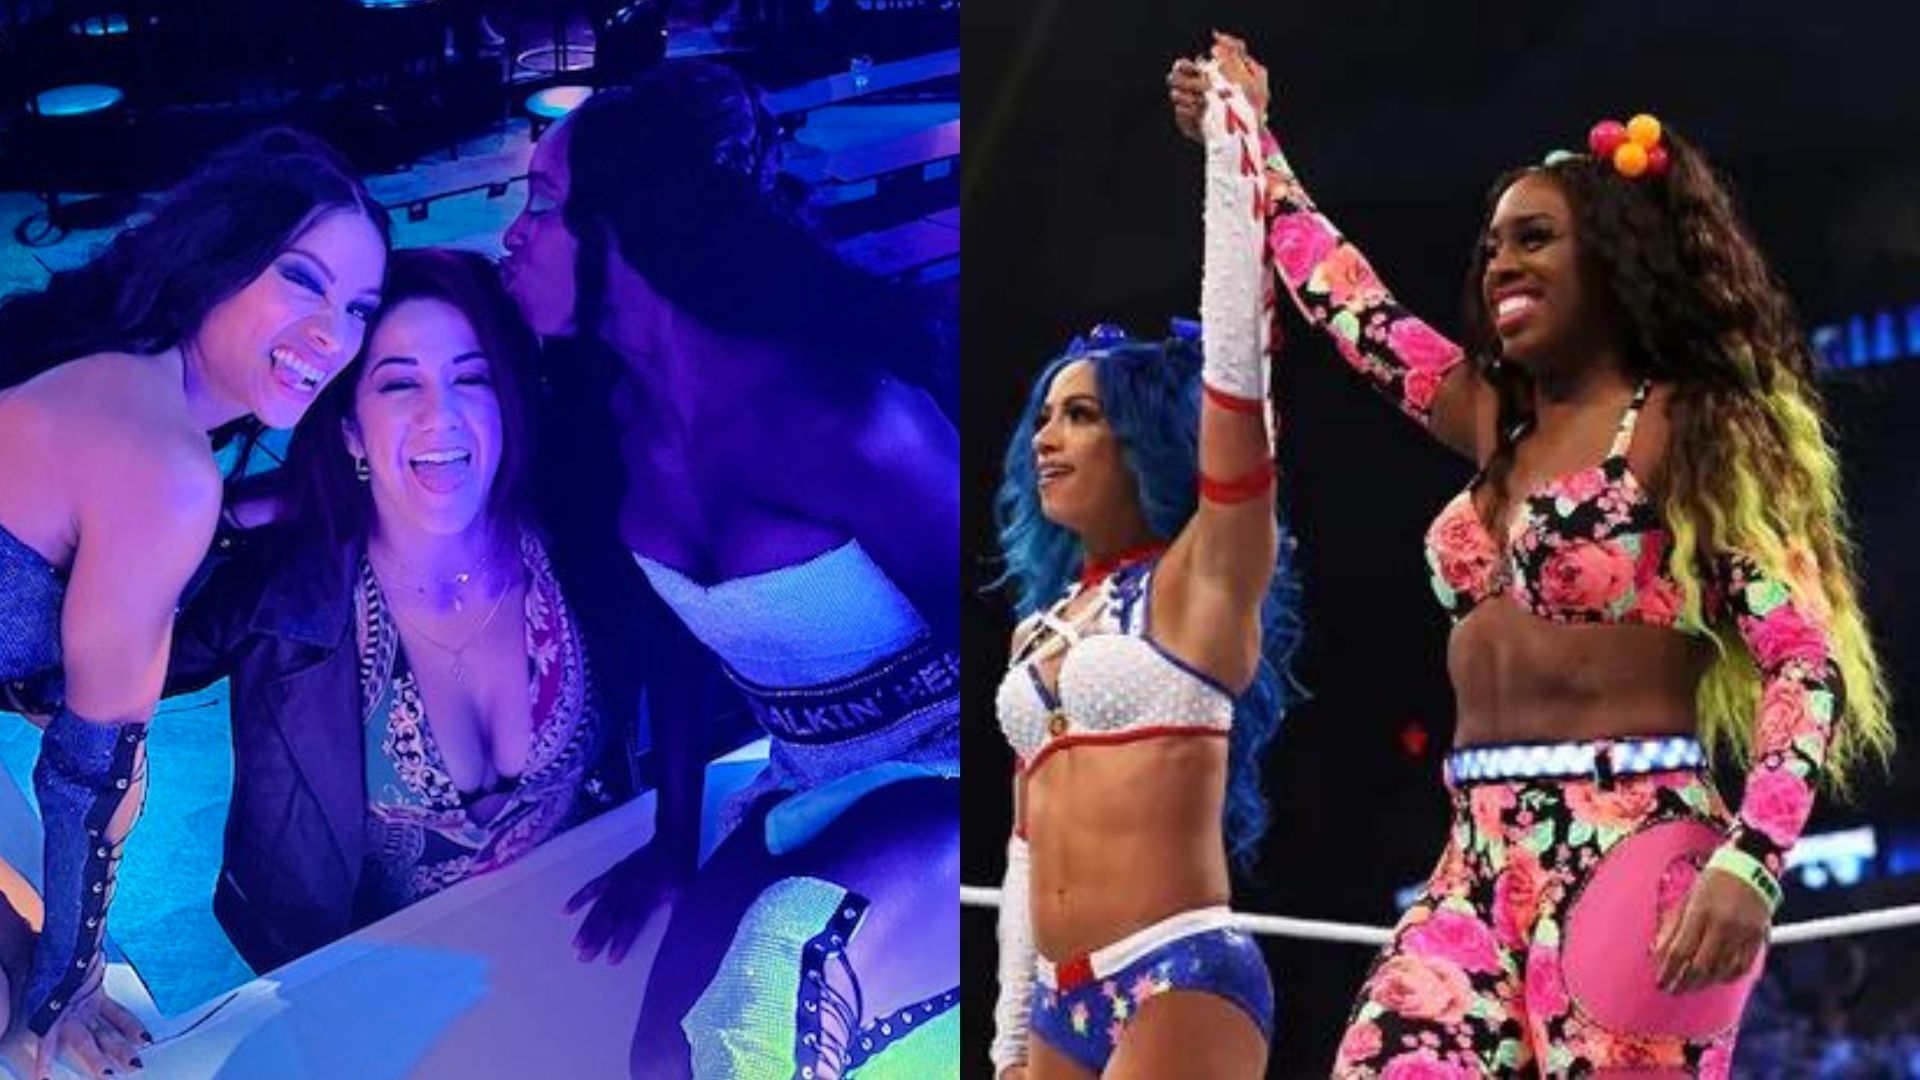 Naomi has sent a message to Bayley after arriving in Japan